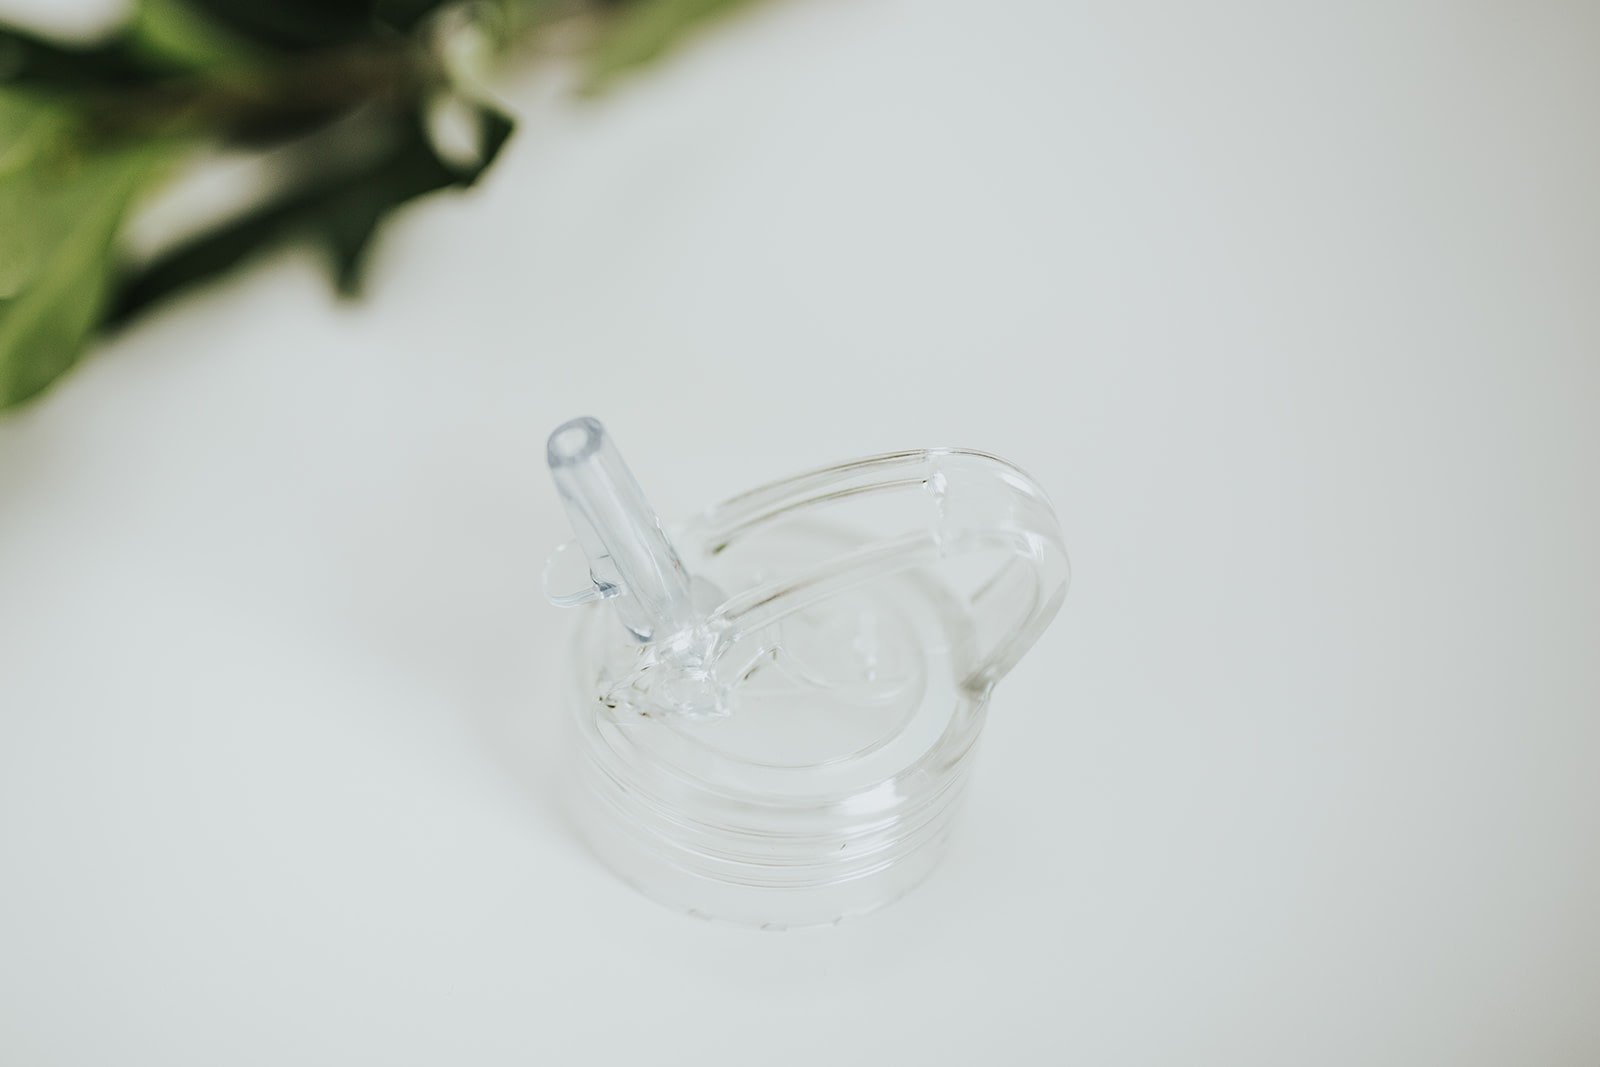 Clear folding straw lid on white background with green foliage in top left corner - lifewithPandJ